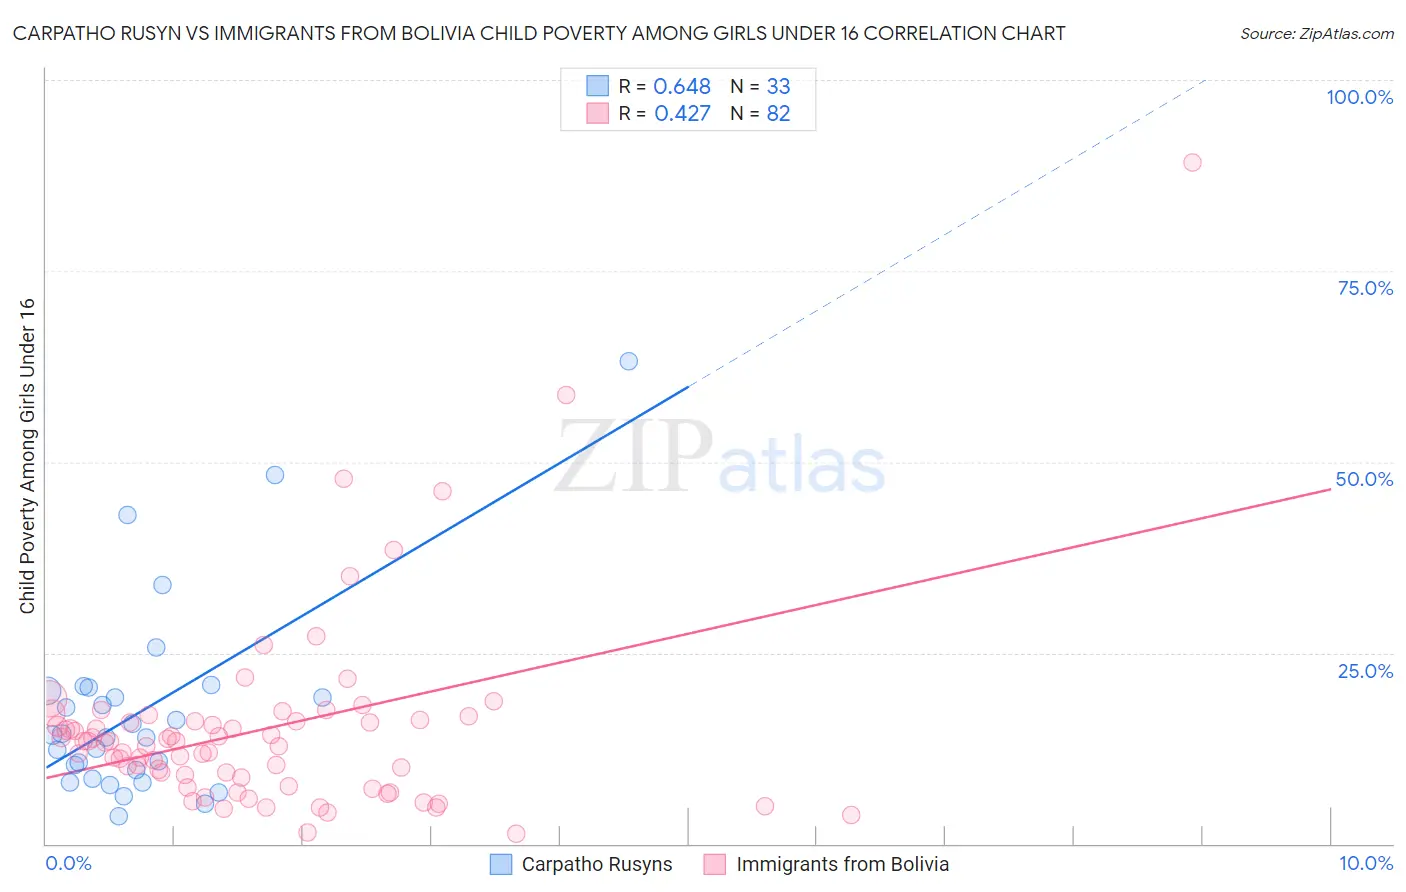 Carpatho Rusyn vs Immigrants from Bolivia Child Poverty Among Girls Under 16